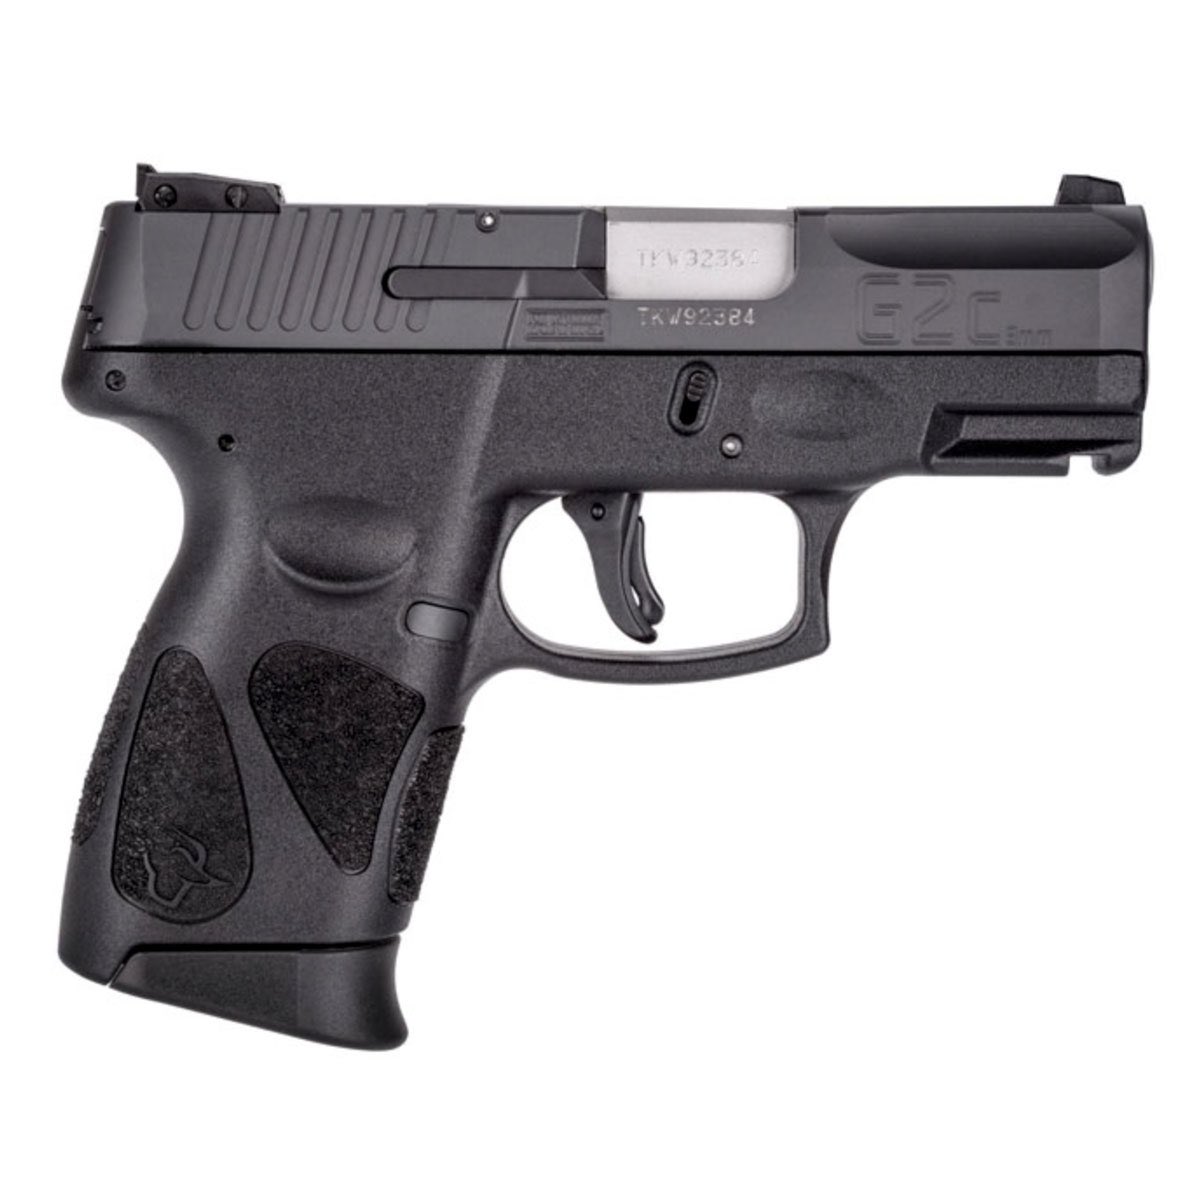 Taurus G2C 9mm. The first two pistols did not have external safeties, this one does! It’s also subcompact, great for concealing and smaller hands. It’s a 9mm caliber, the most common and reliable bullet size. Recoil is also small!